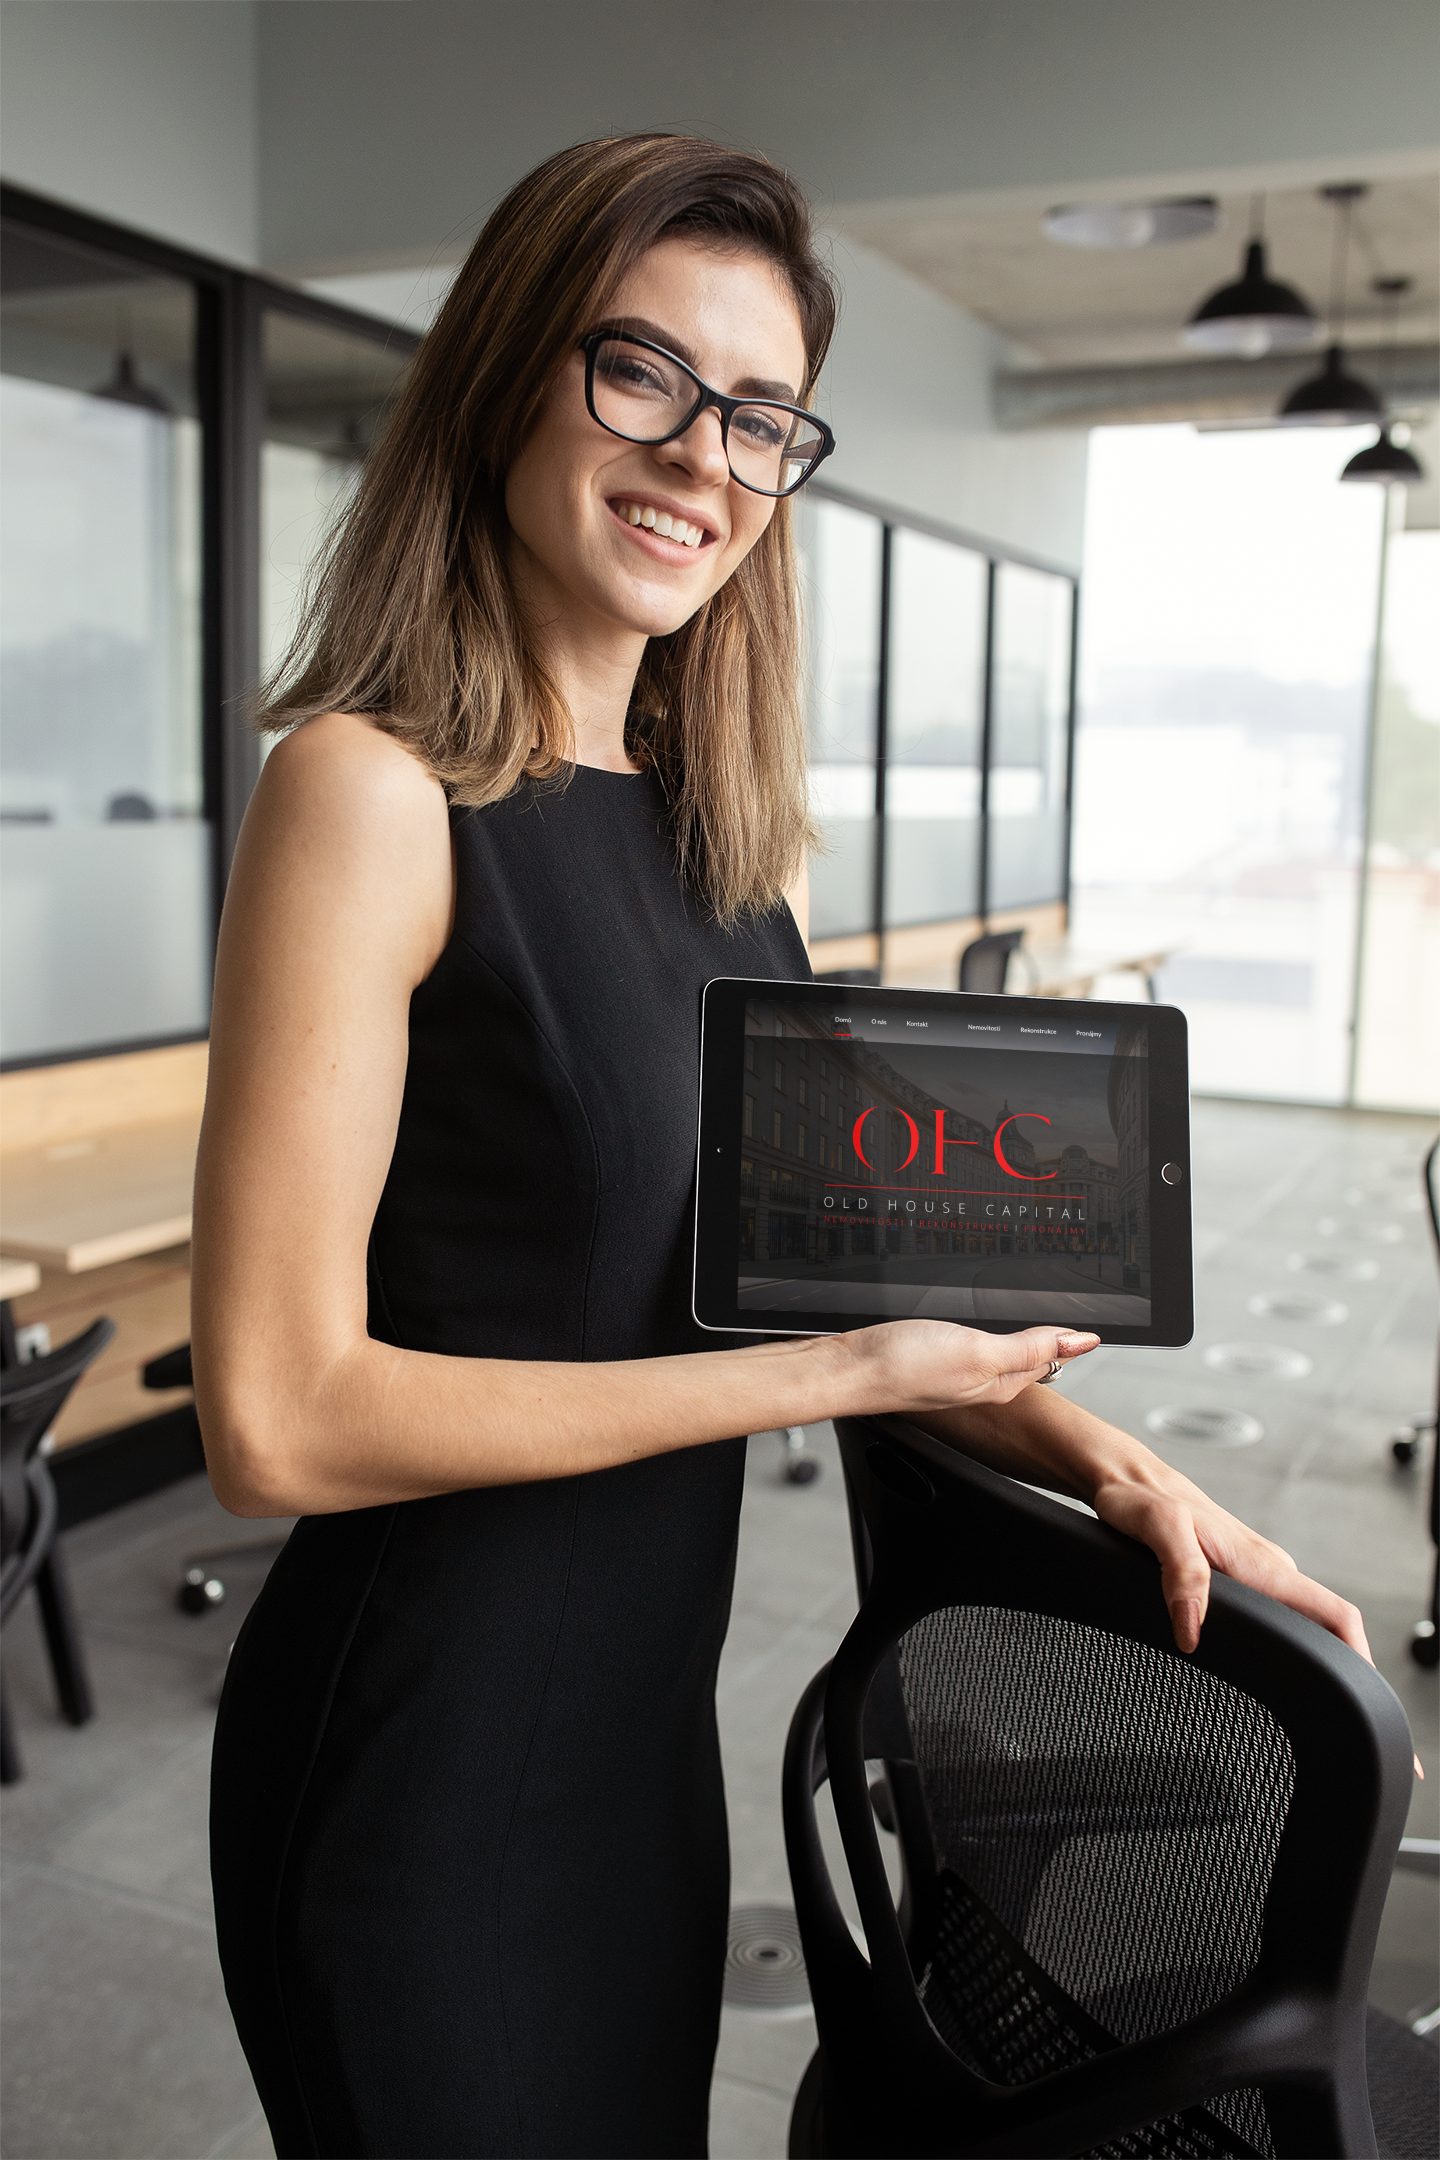 https://ohcapital.cz/wp-content/uploads/2022/08/mockup-of-a-smiling-office-woman-holding-an-ipad-in-landscape-position-22824.png